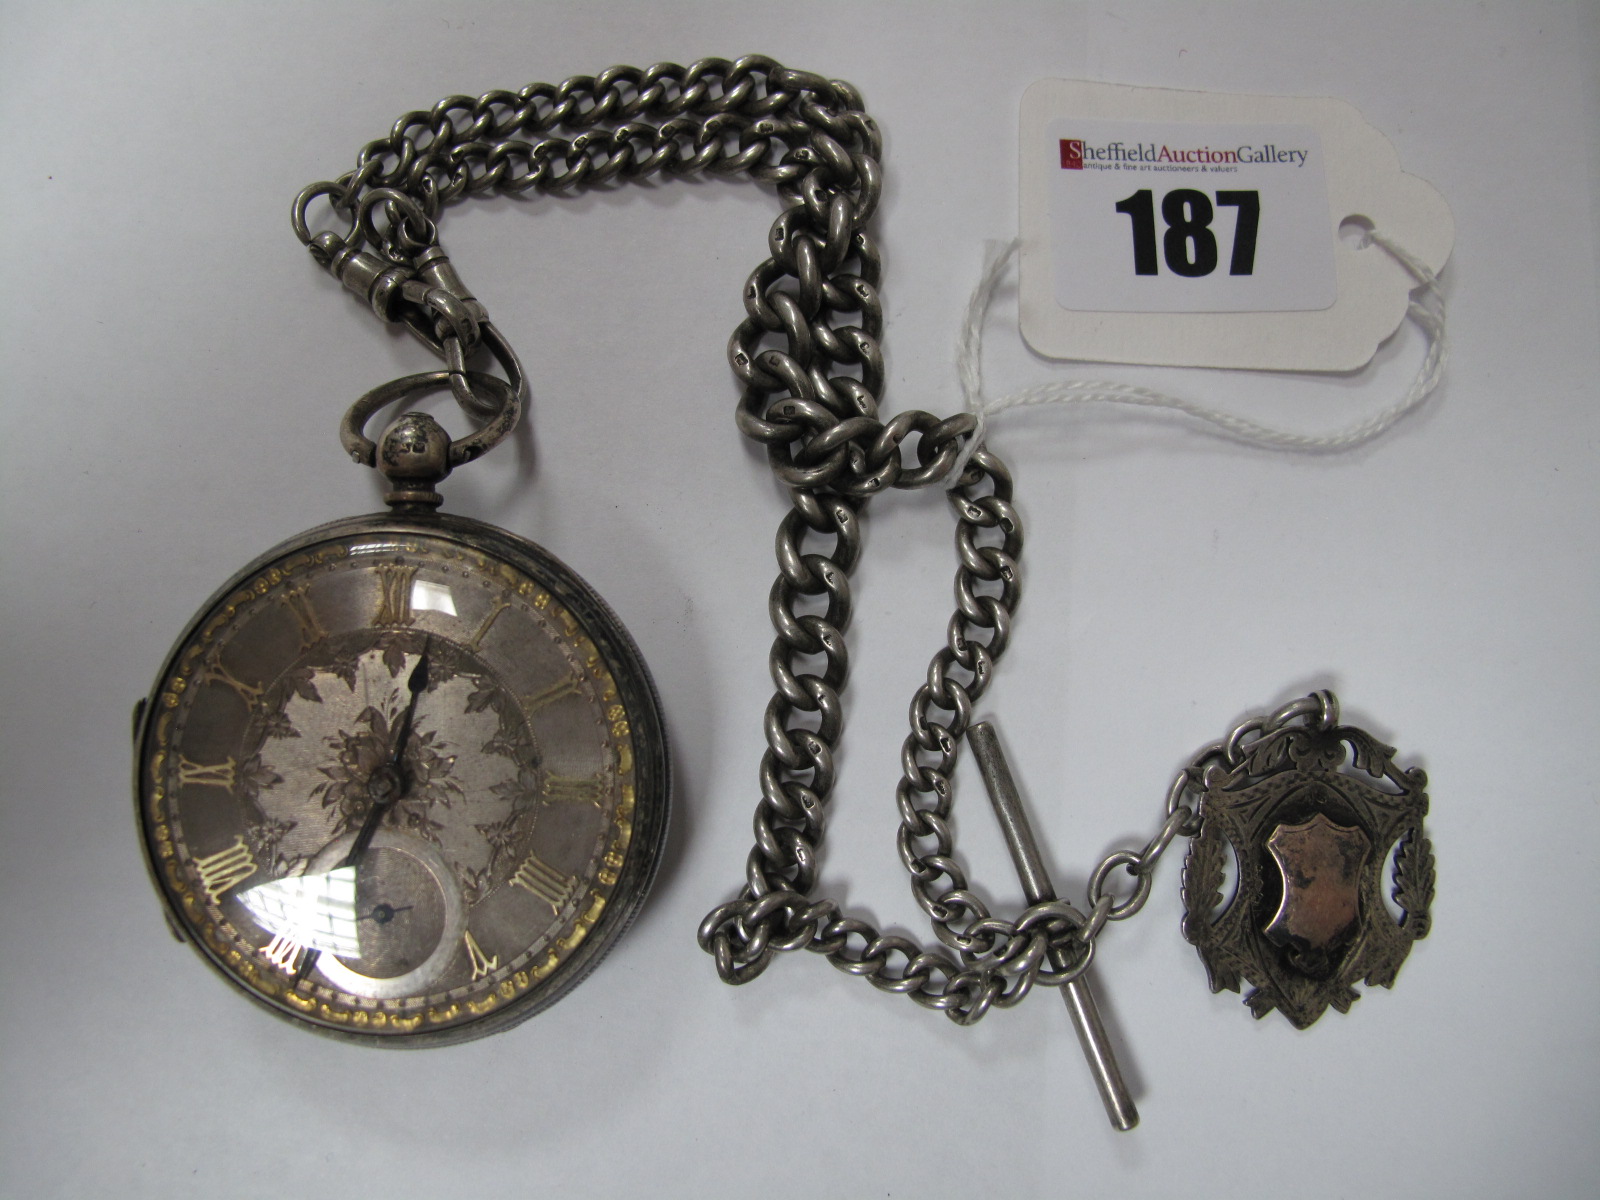 A Hallmarked Silver Cased Openface Pocketwatch, the foliate engraved dial with Roman numerals and